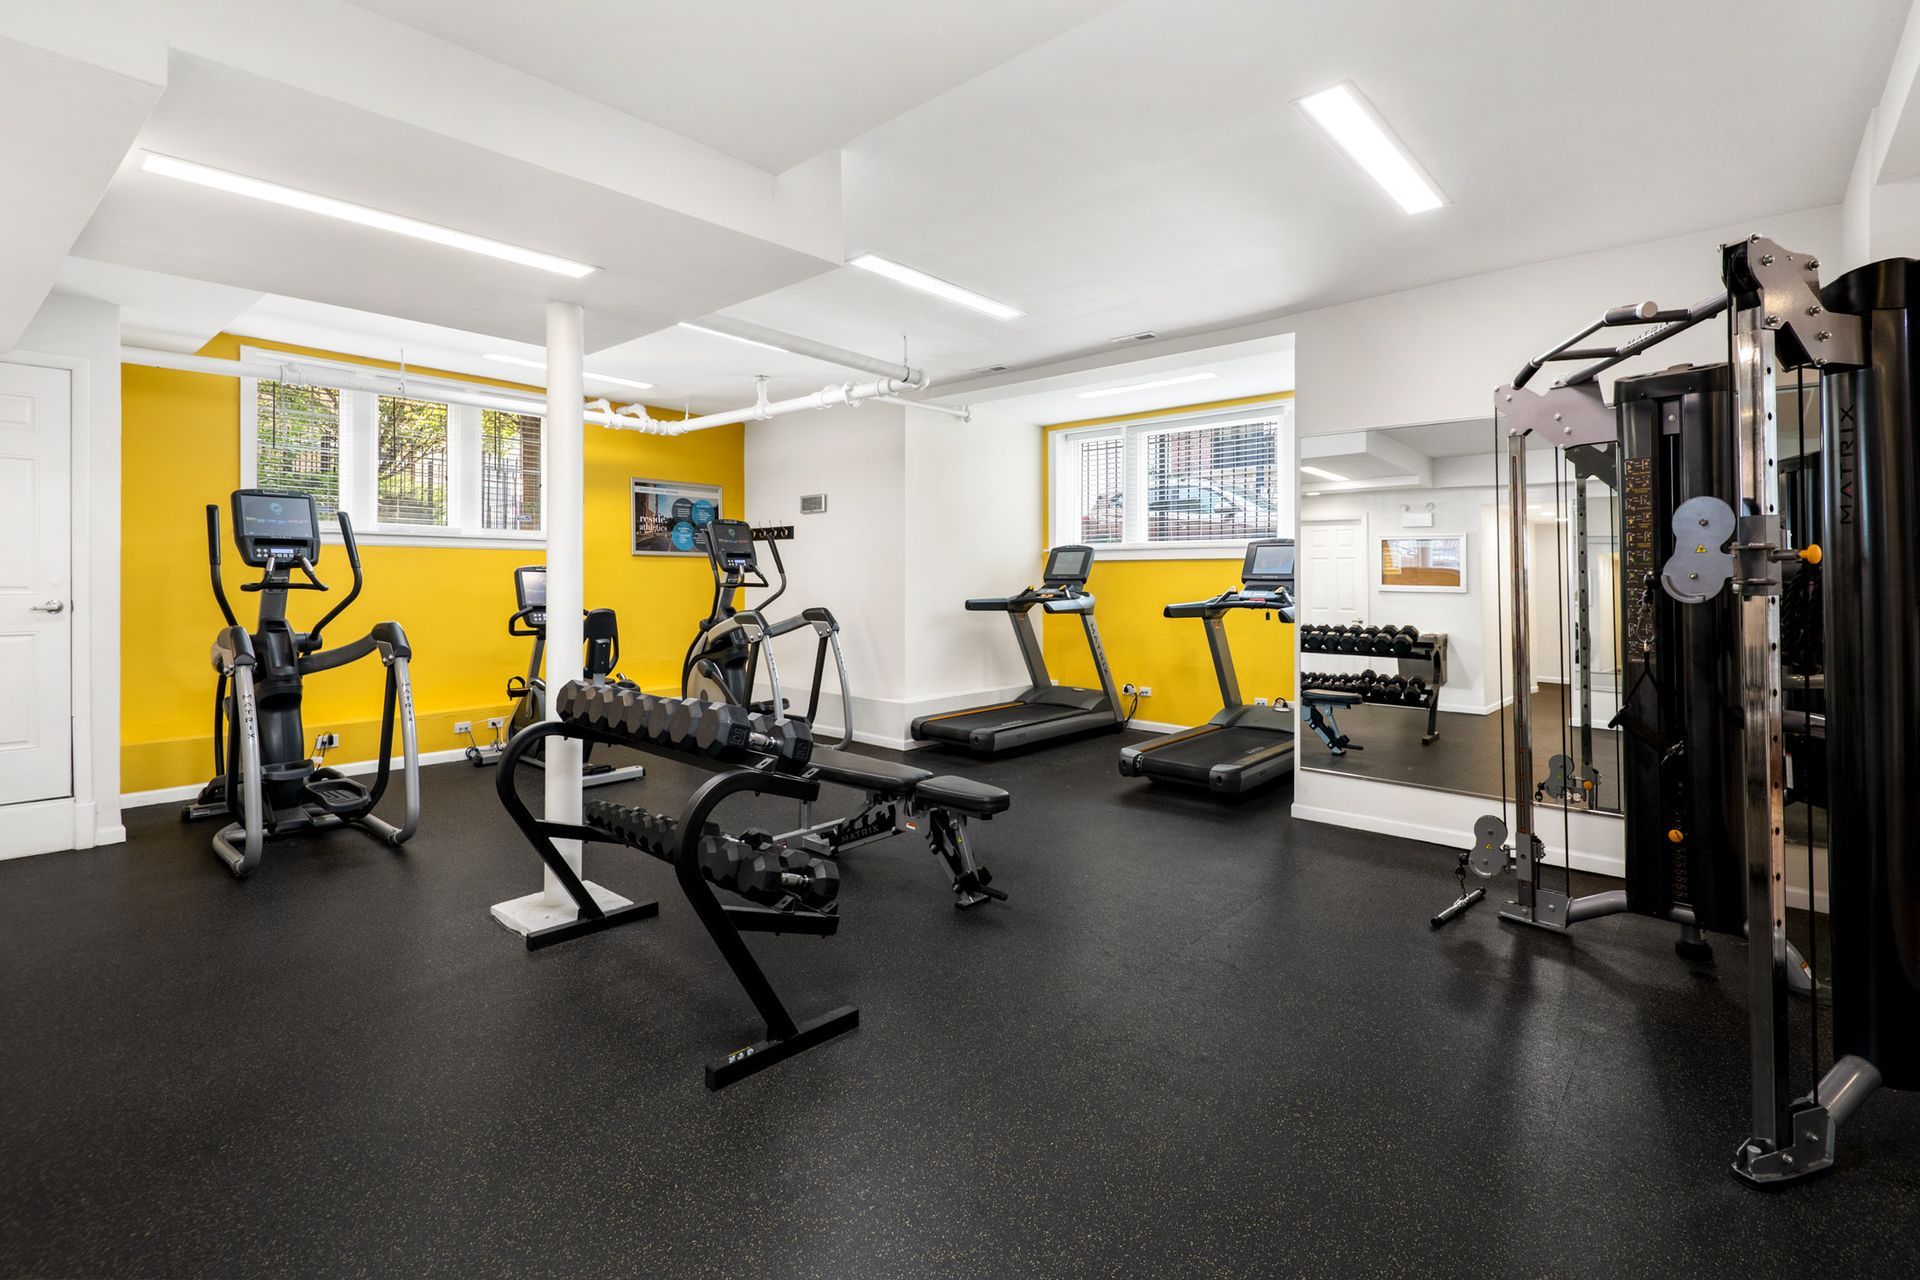 A gym with a lot of equipment and a yellow wall.